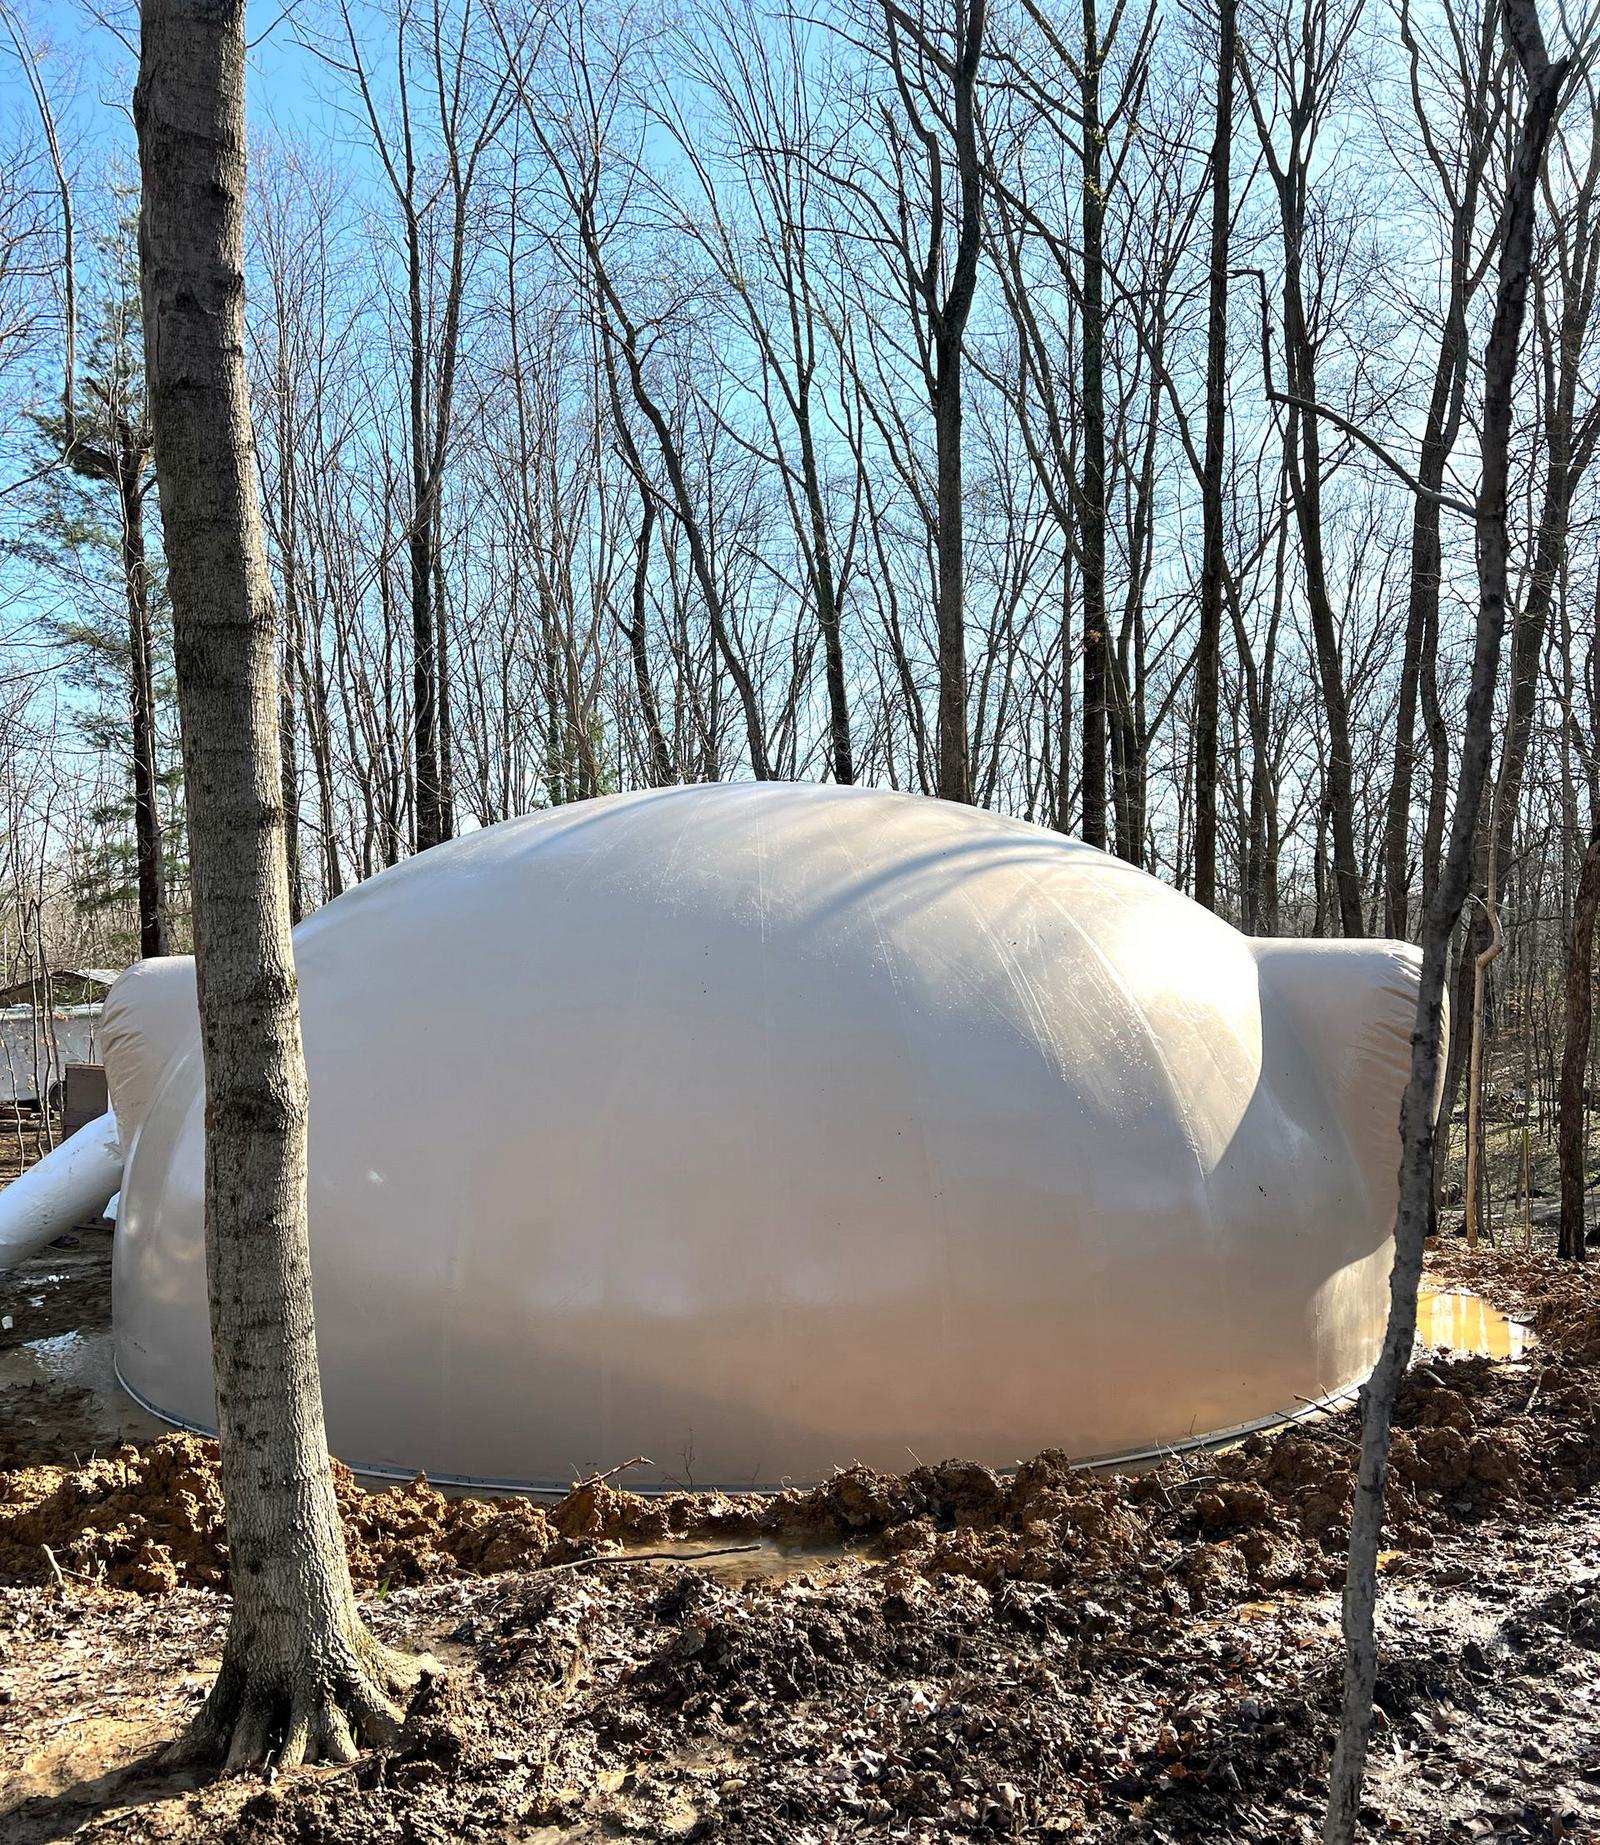 The fully inflated Airform for Kathy Salyer's new Monolithic Dome home.